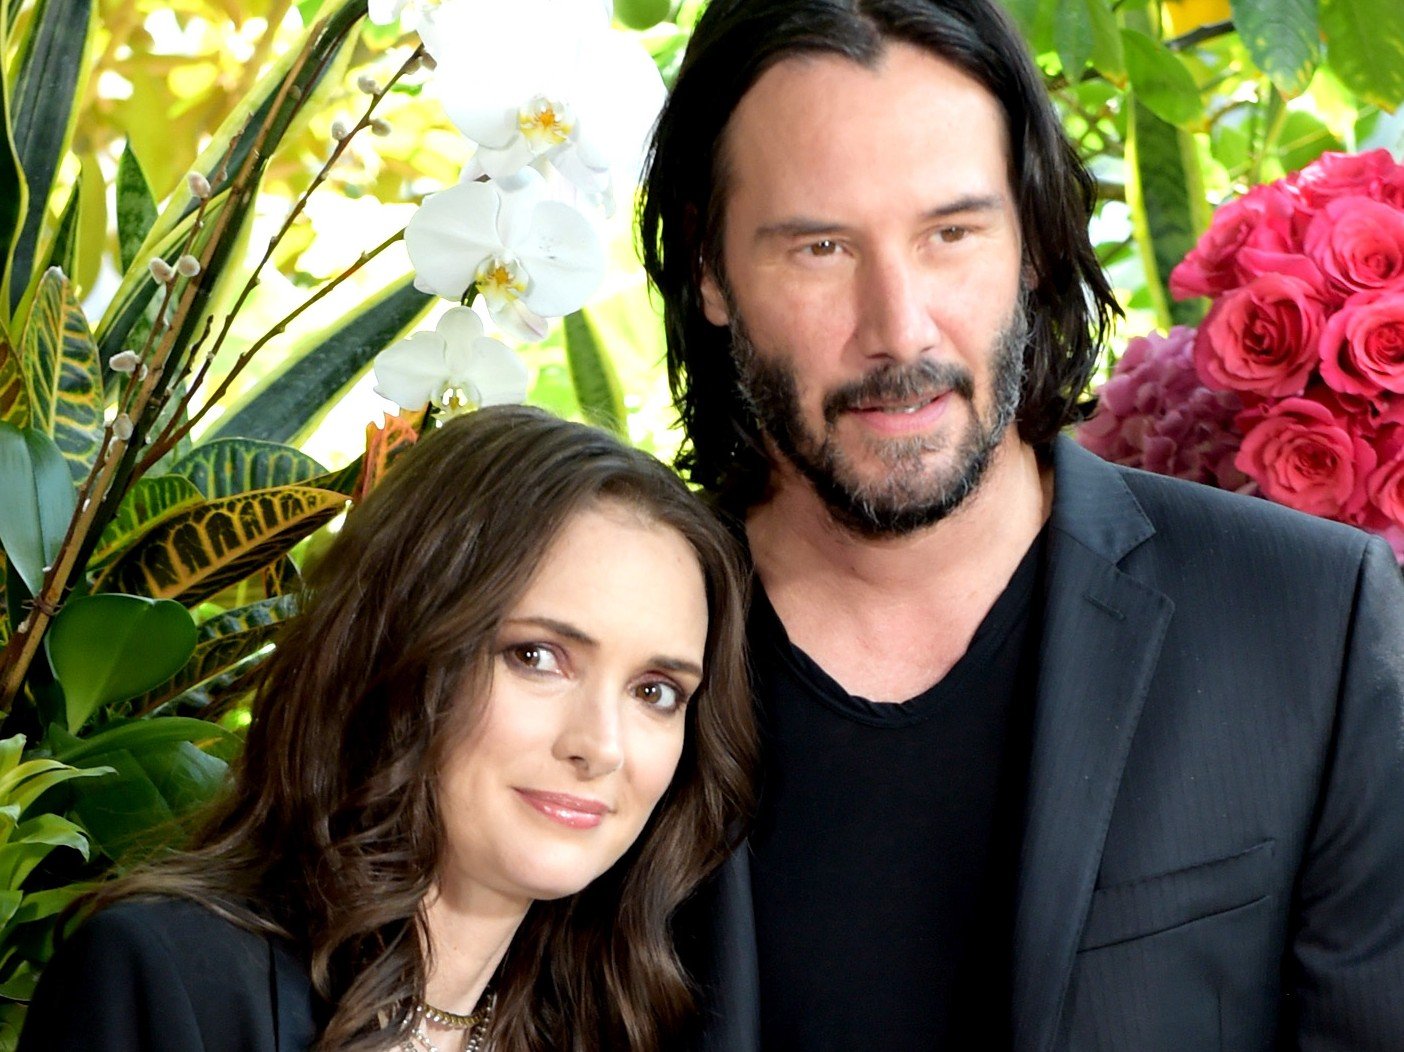 Is Keanu Reeves Actually Winona Ryder’s Husband?